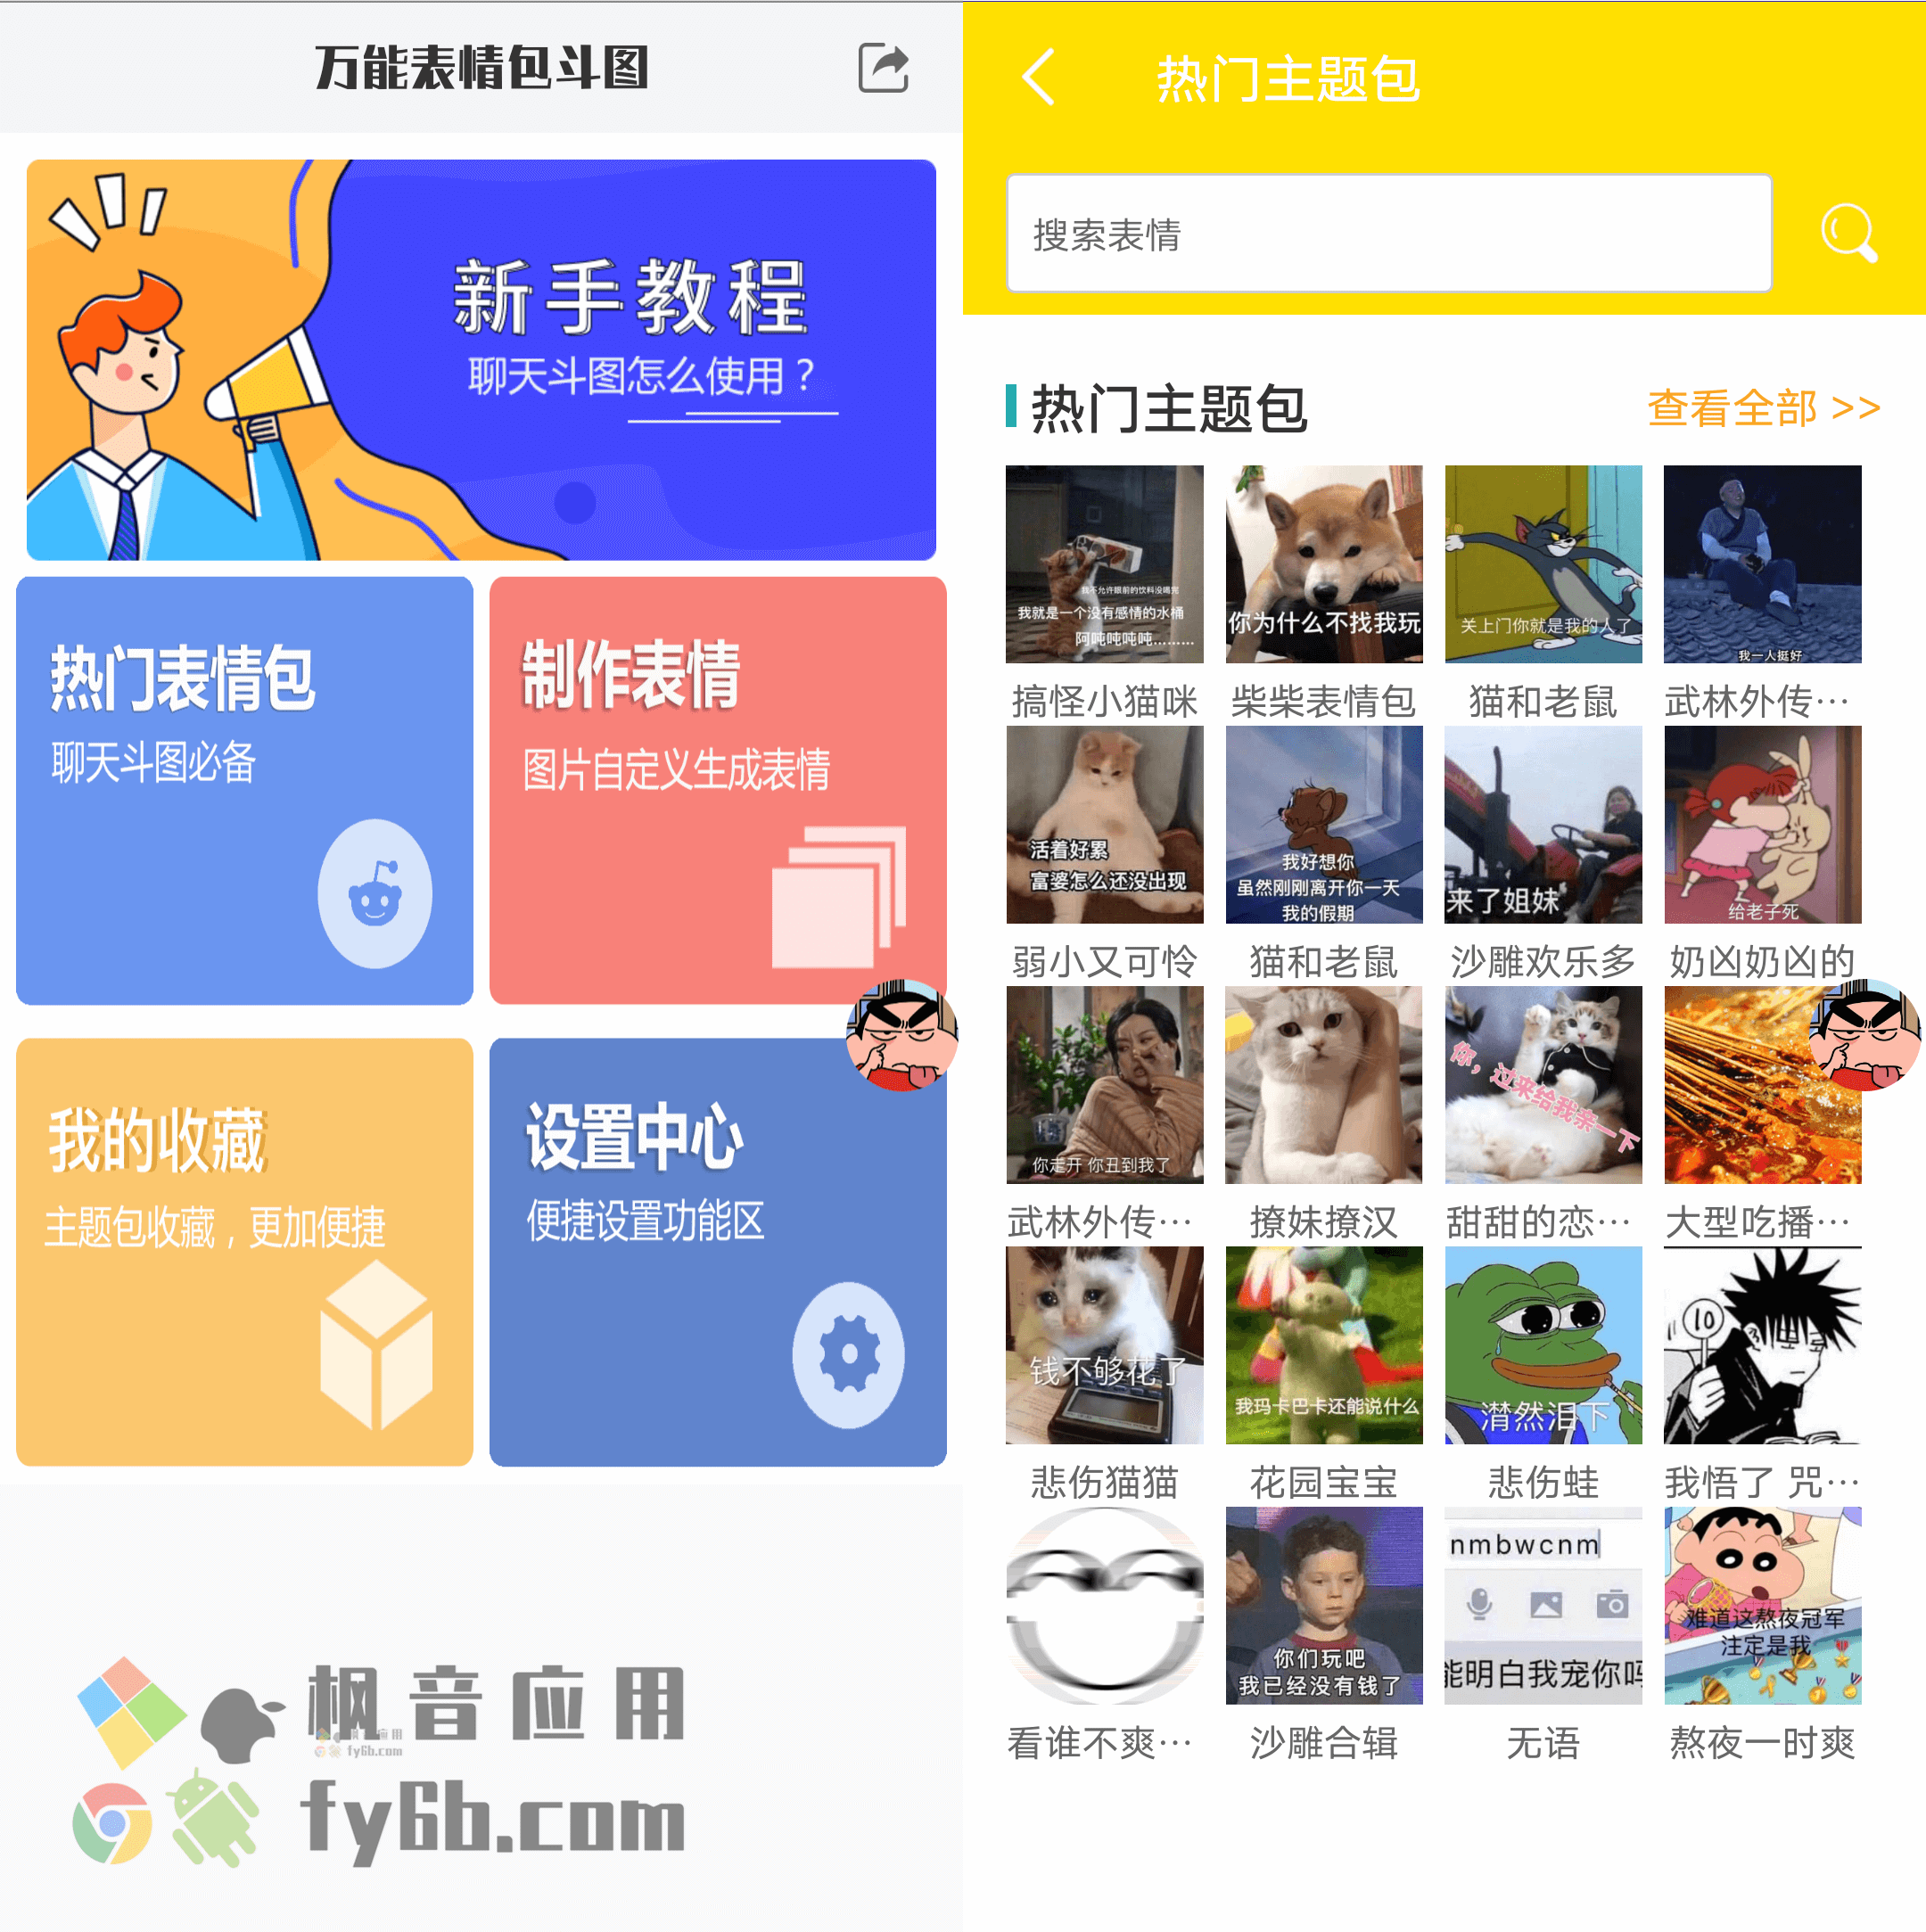 Android 万能表情包斗图_v1.0.3